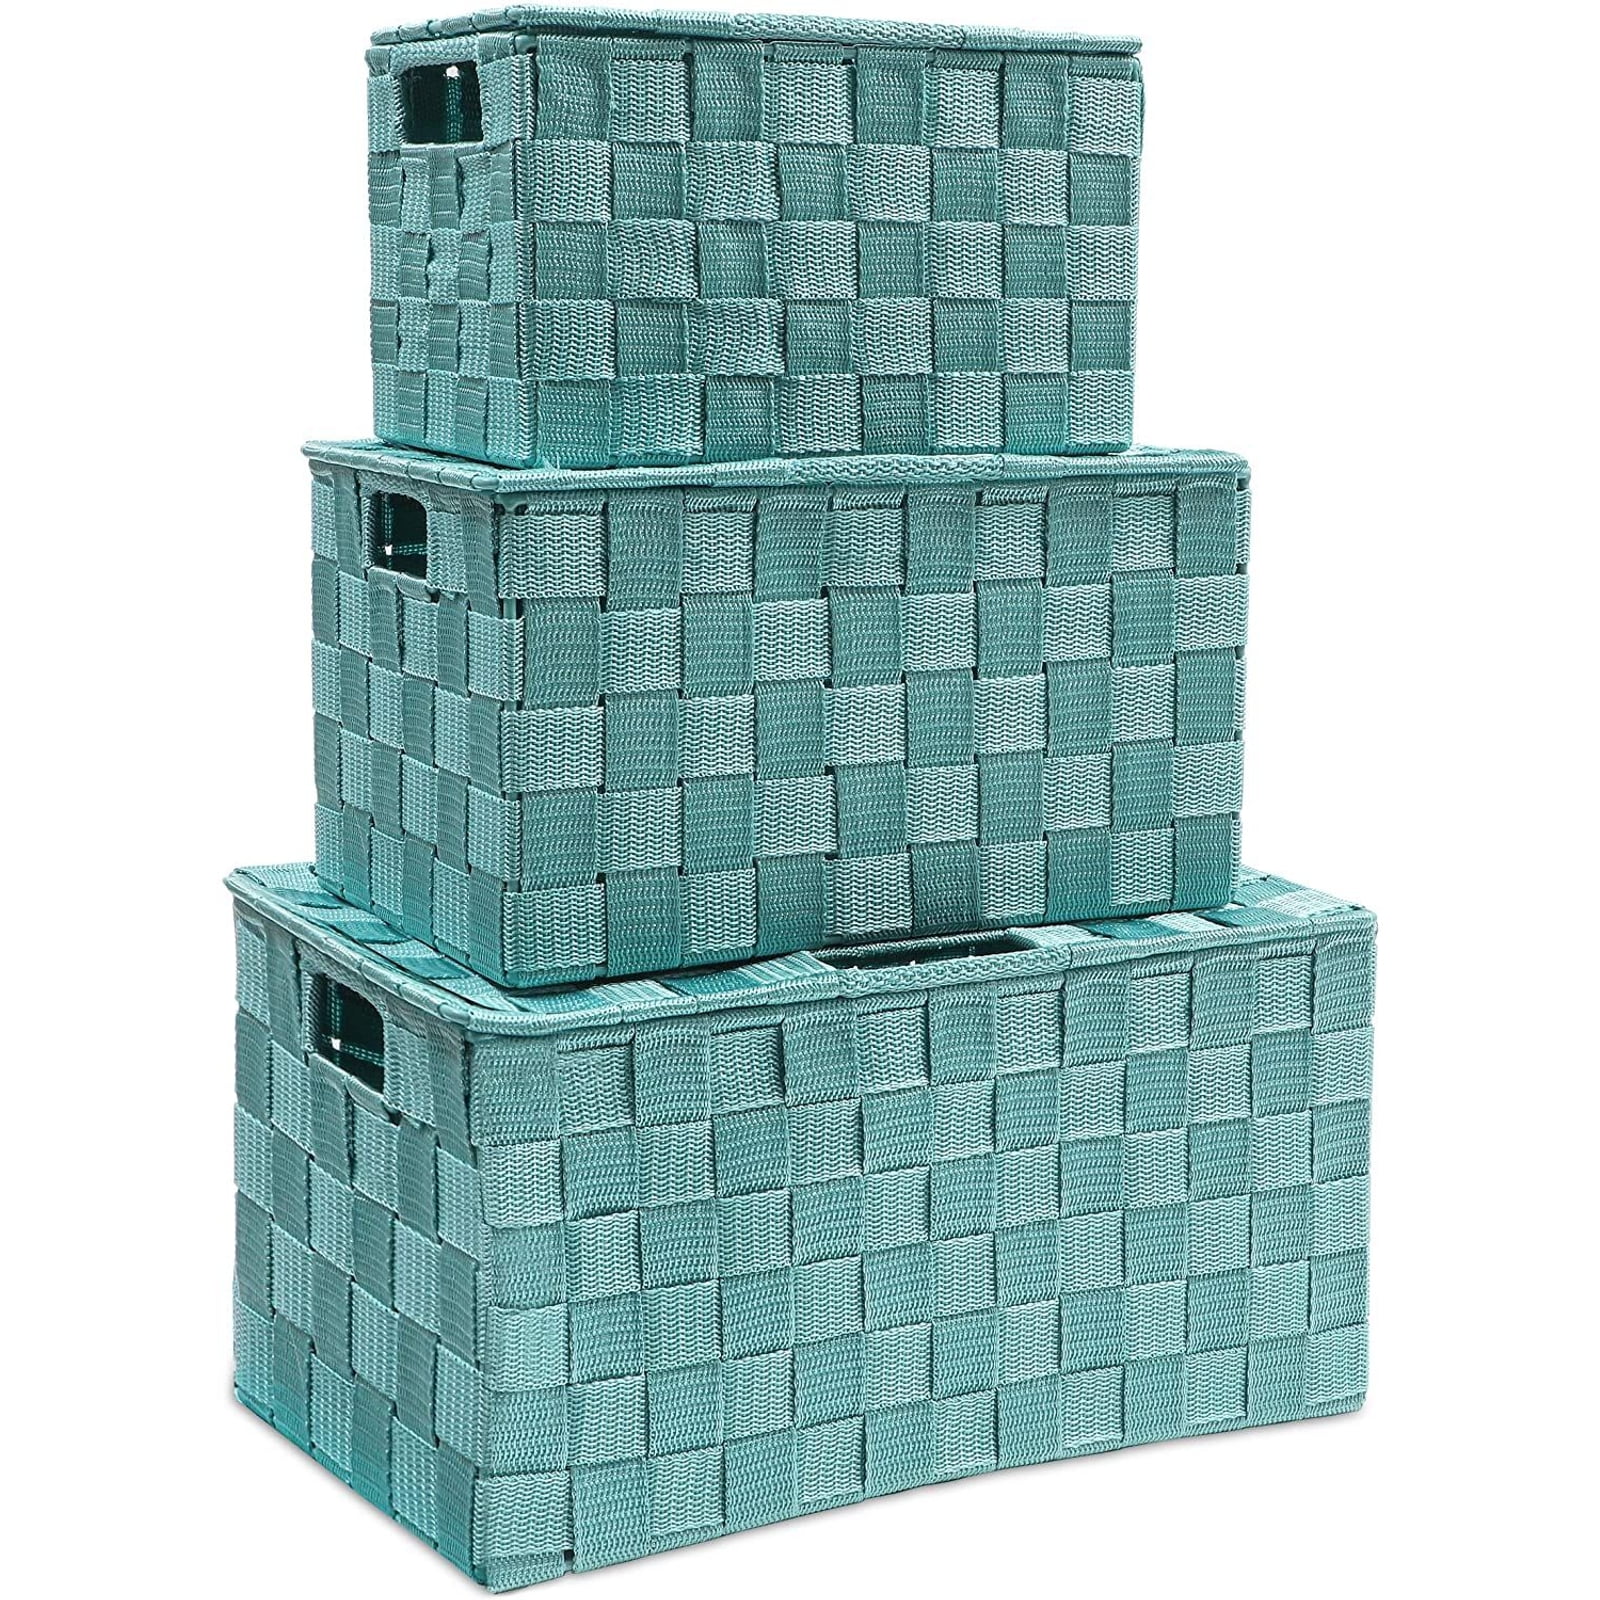 FOLDABLE COLLAPSIBLE STORAGE CUBE BASKET TEAL BOX ORGANIZER FABRIC FLAT NEW 